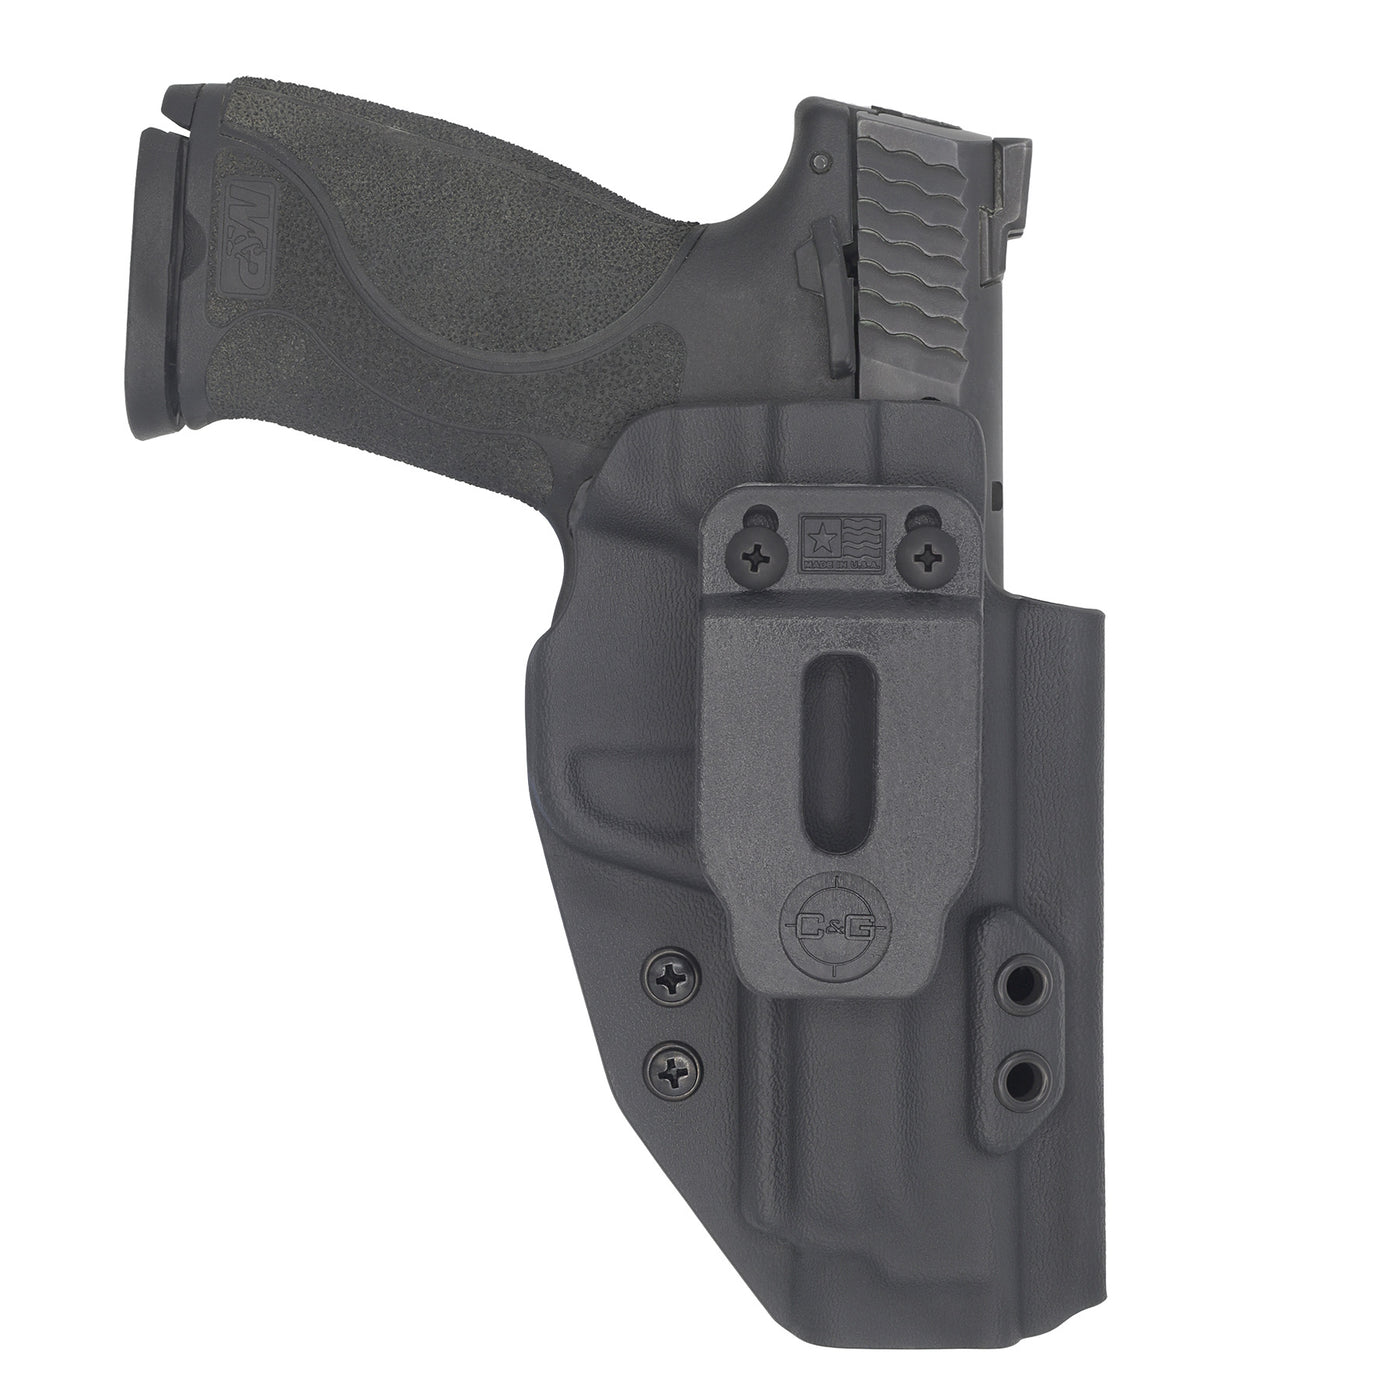 C&G Holsters custom Covert IWB kydex holster for S&W M&P 2.0 9/40 4.25" front with gun